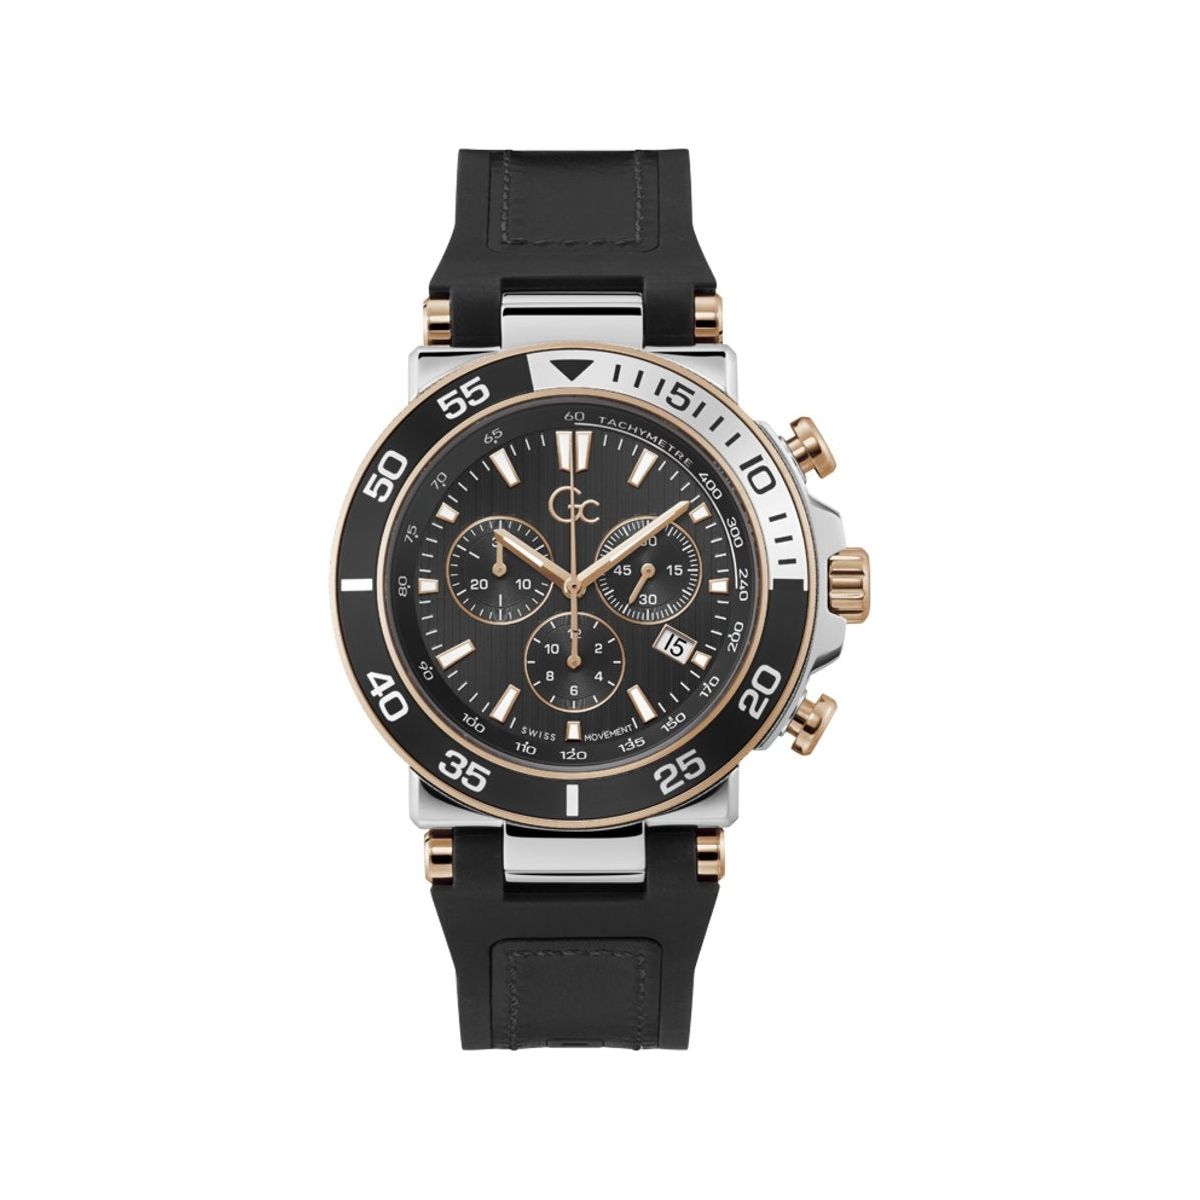 GUESS COLLECTION GUESS COLLECTION WATCHES Mod. Z14005G2MF WATCHES guess-collection-watches-mod-z14005g2mf